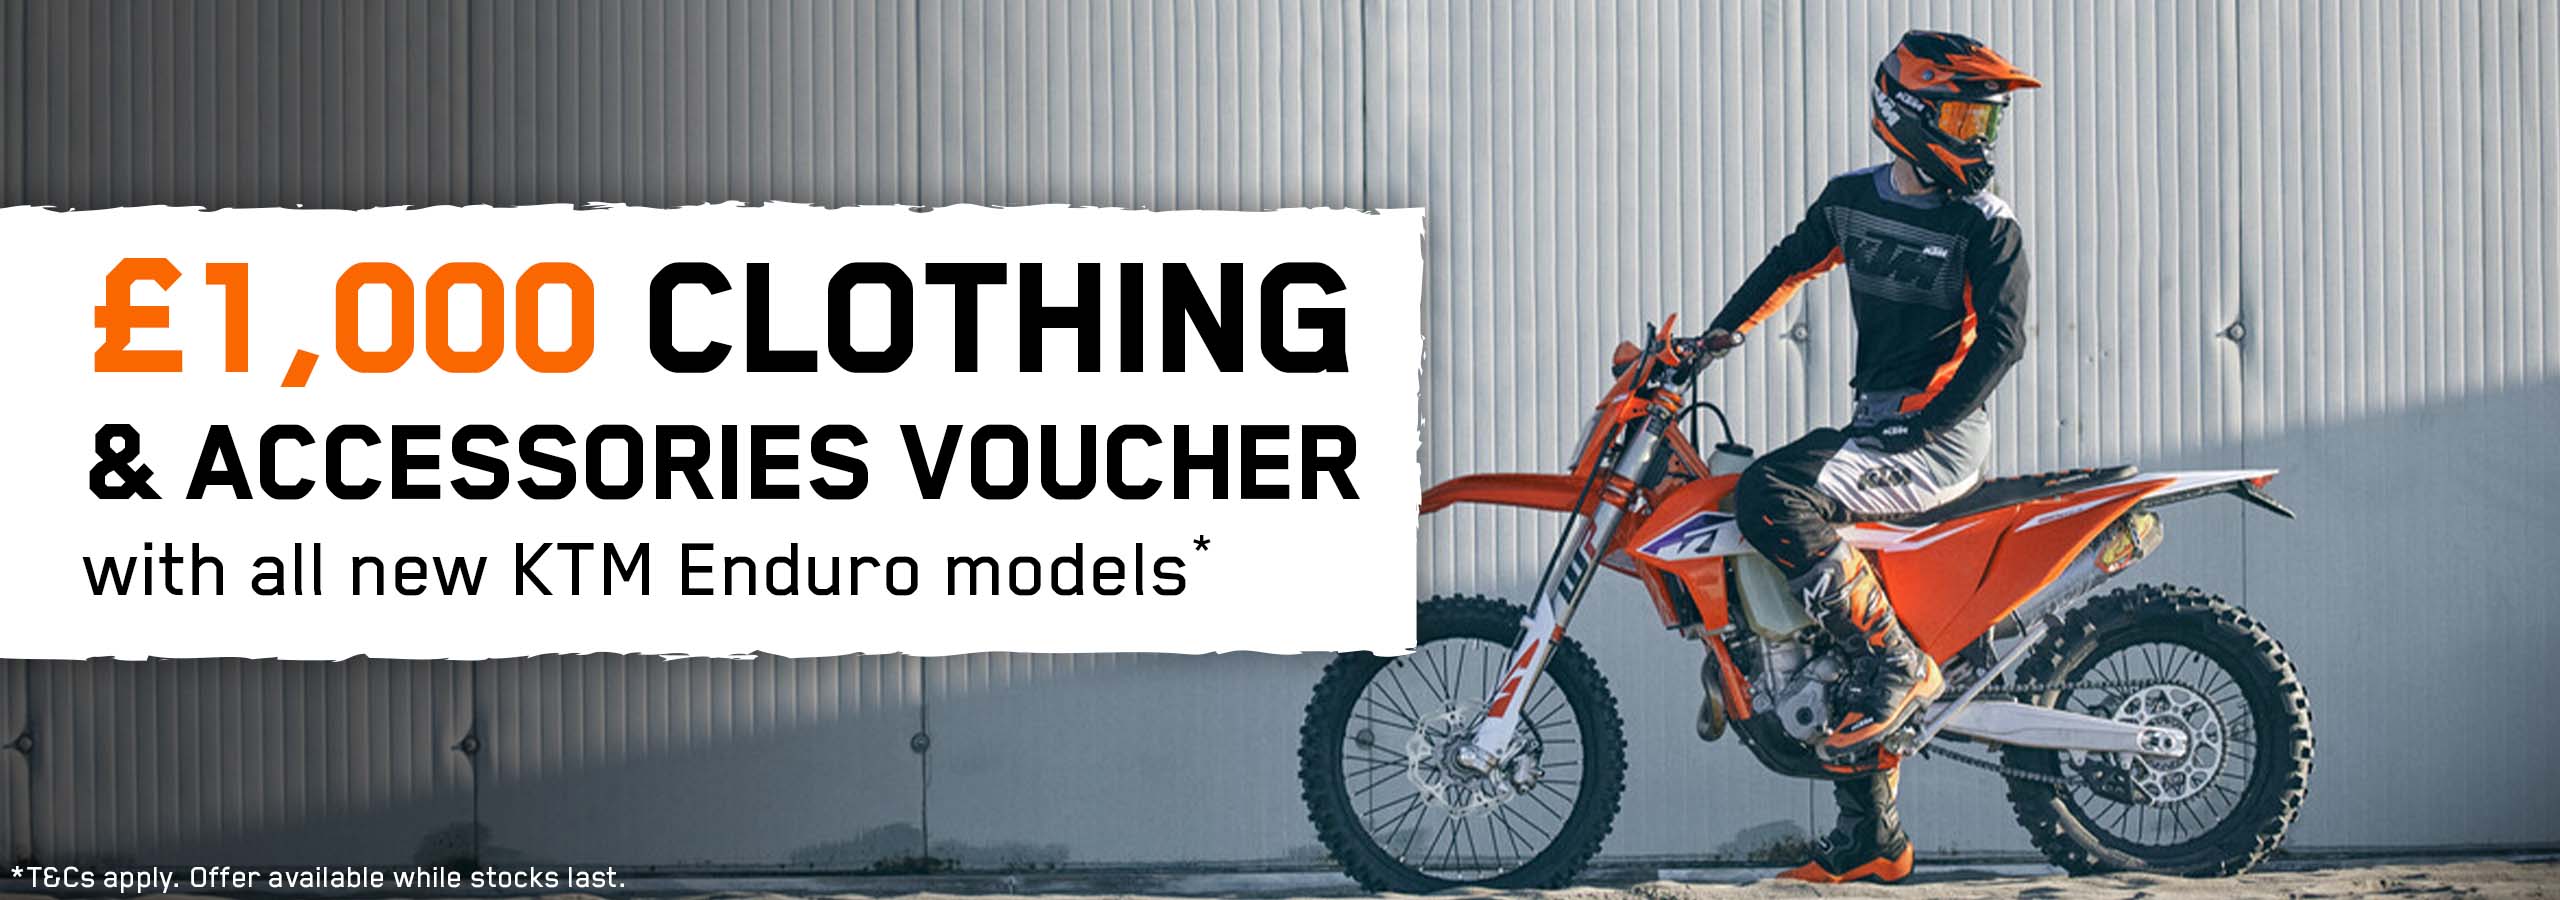 Enjoy a £1,000 clothing and accessories voucher when you purchase any new KTM Enduro model from Laguna Motorcycles in Maidstone or Ashford.